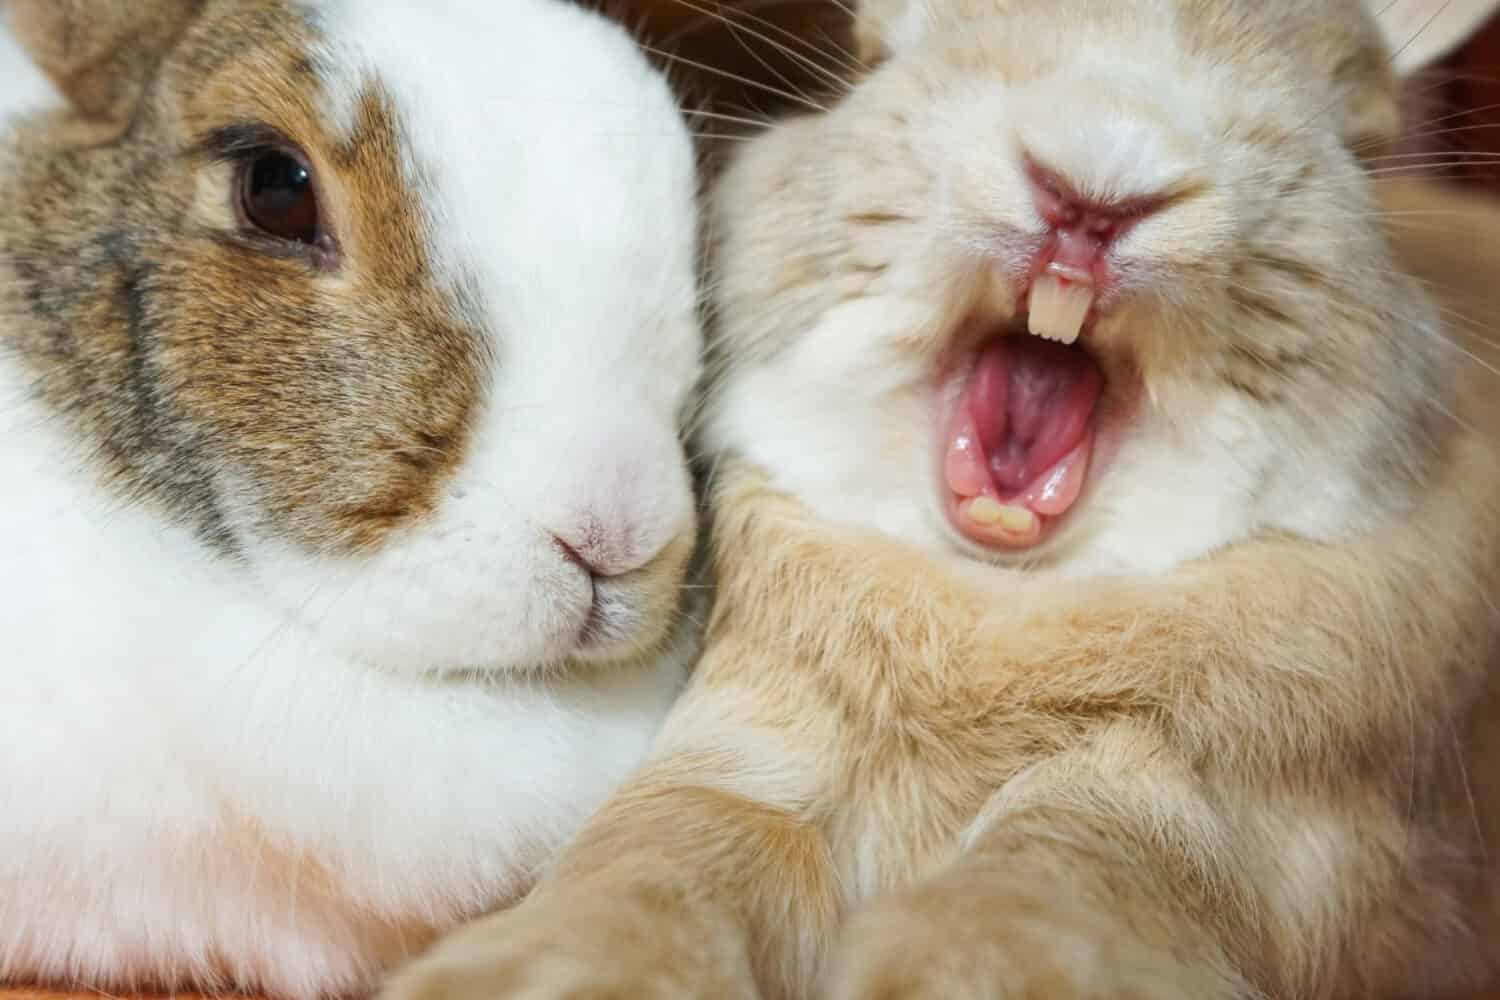 Close-Up Yawning Tired Rabbit Bunny Showing Teeth and Tongue While Stretching Paws and Cuddling With Fellow Rabbit